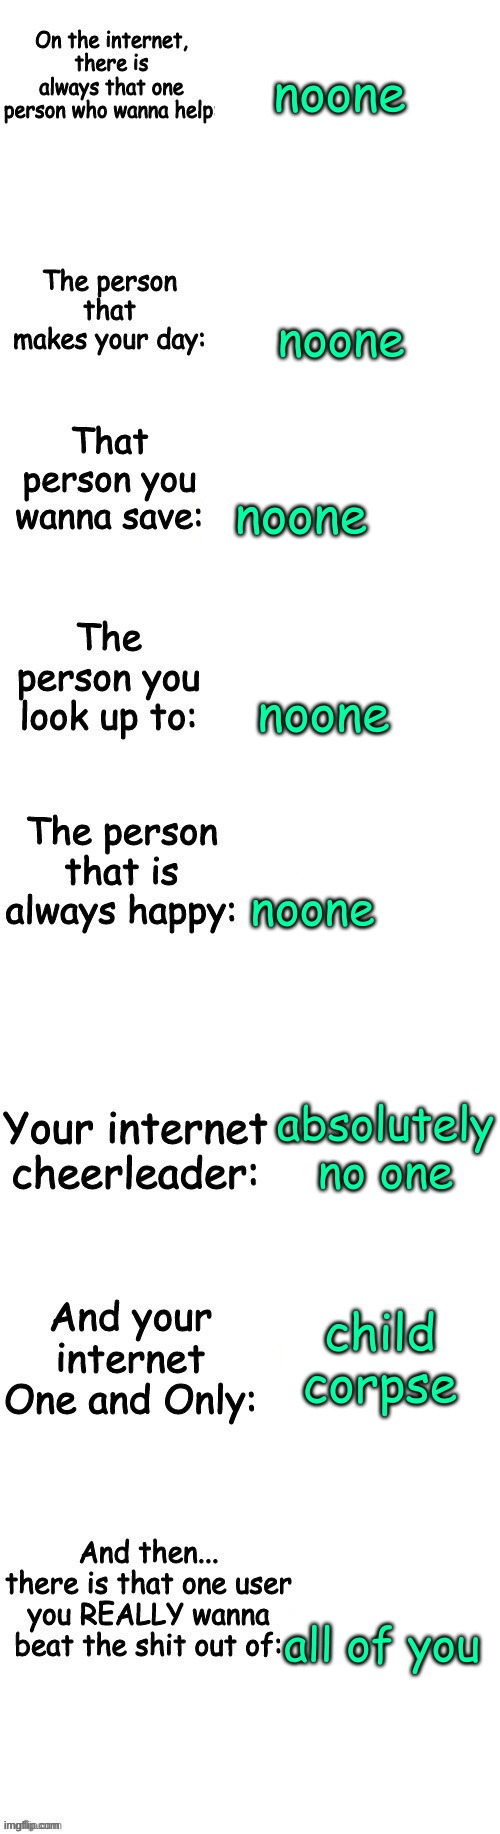 People on the internet | noone; noone; noone; noone; noone; absolutely no one; child corpse; all of you | image tagged in people on the internet | made w/ Imgflip meme maker